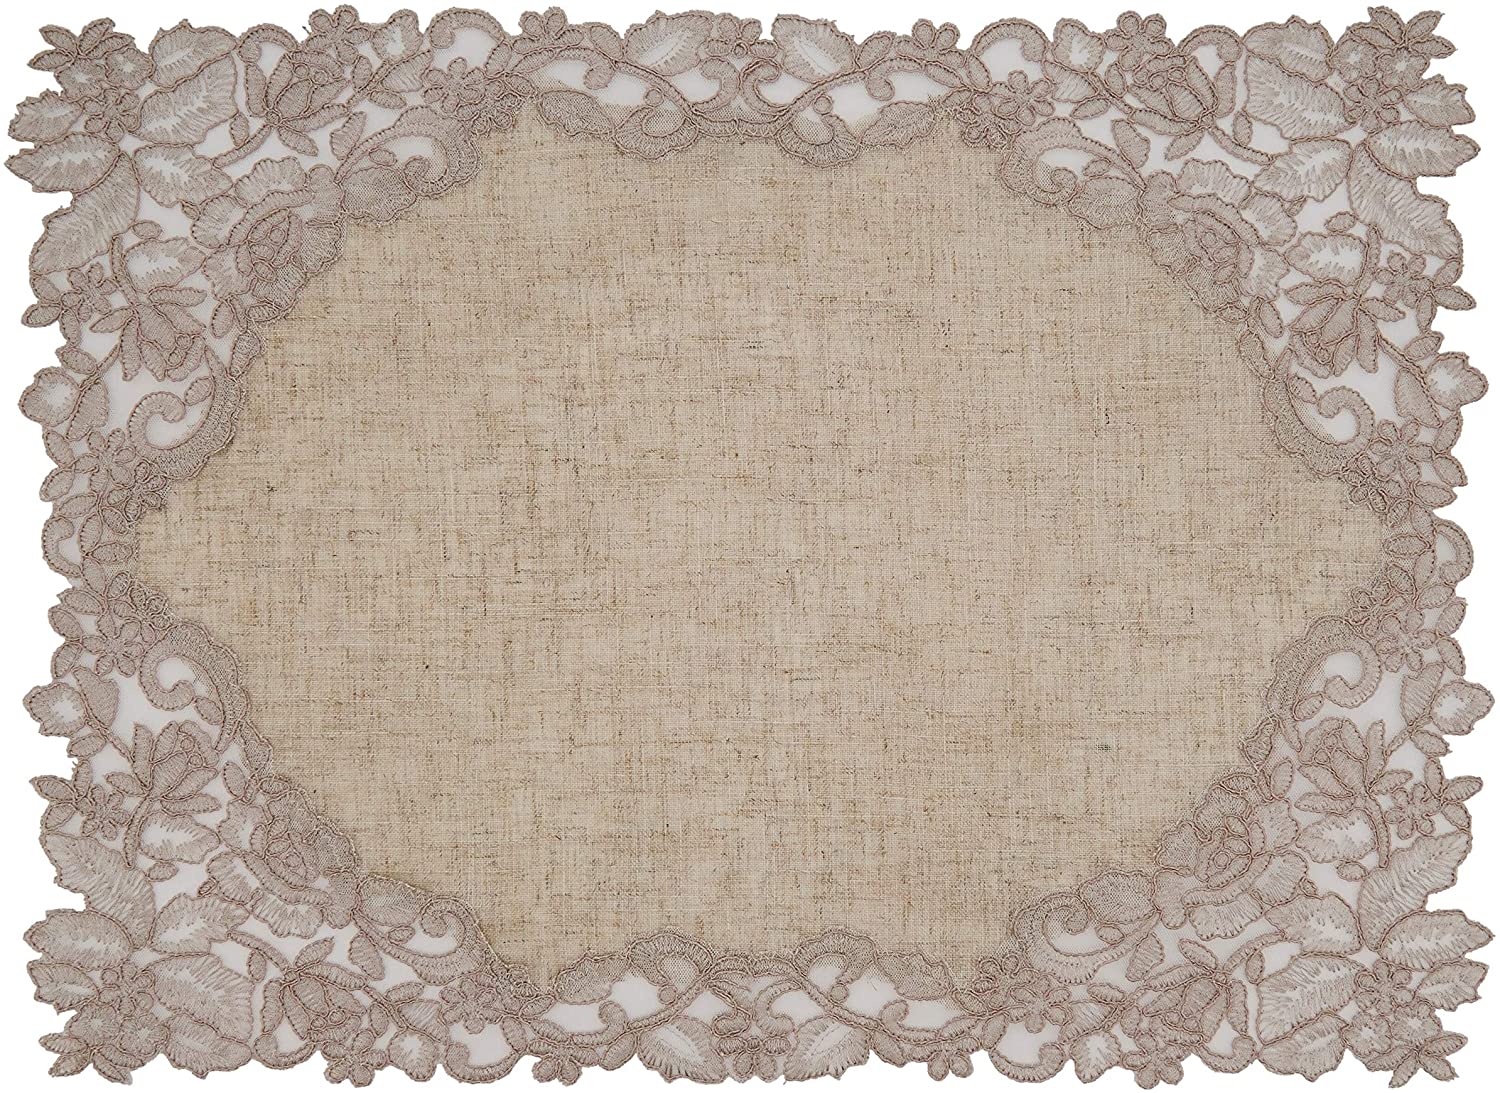 MISC Table Napkin Placemat Set Lace Embroidered Design (1 Placemat Napkin) Tan Oblong Square Polyester